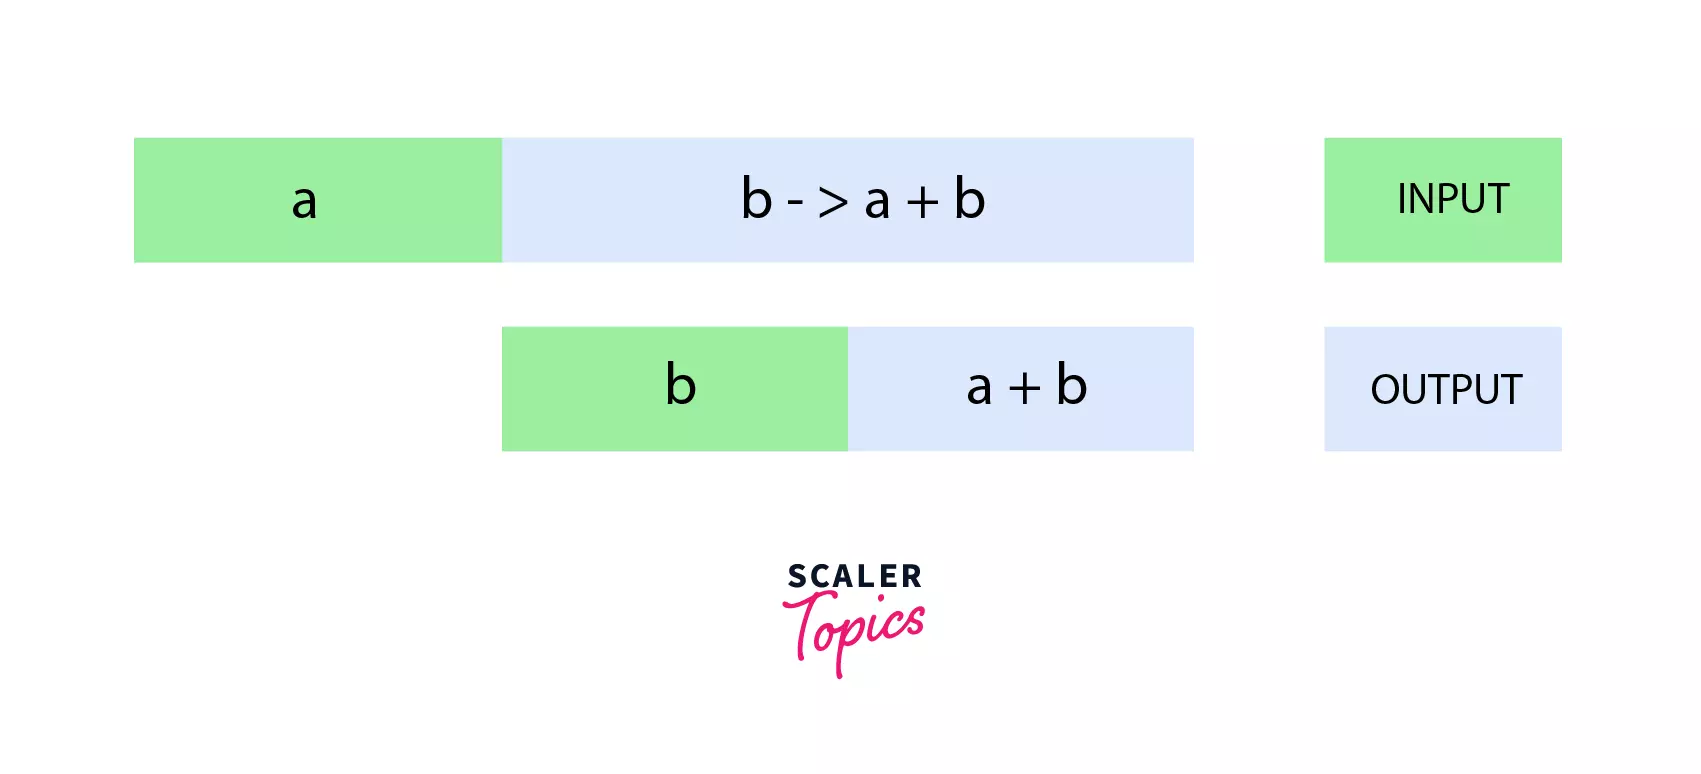 lambda expression can be split into two different expressions